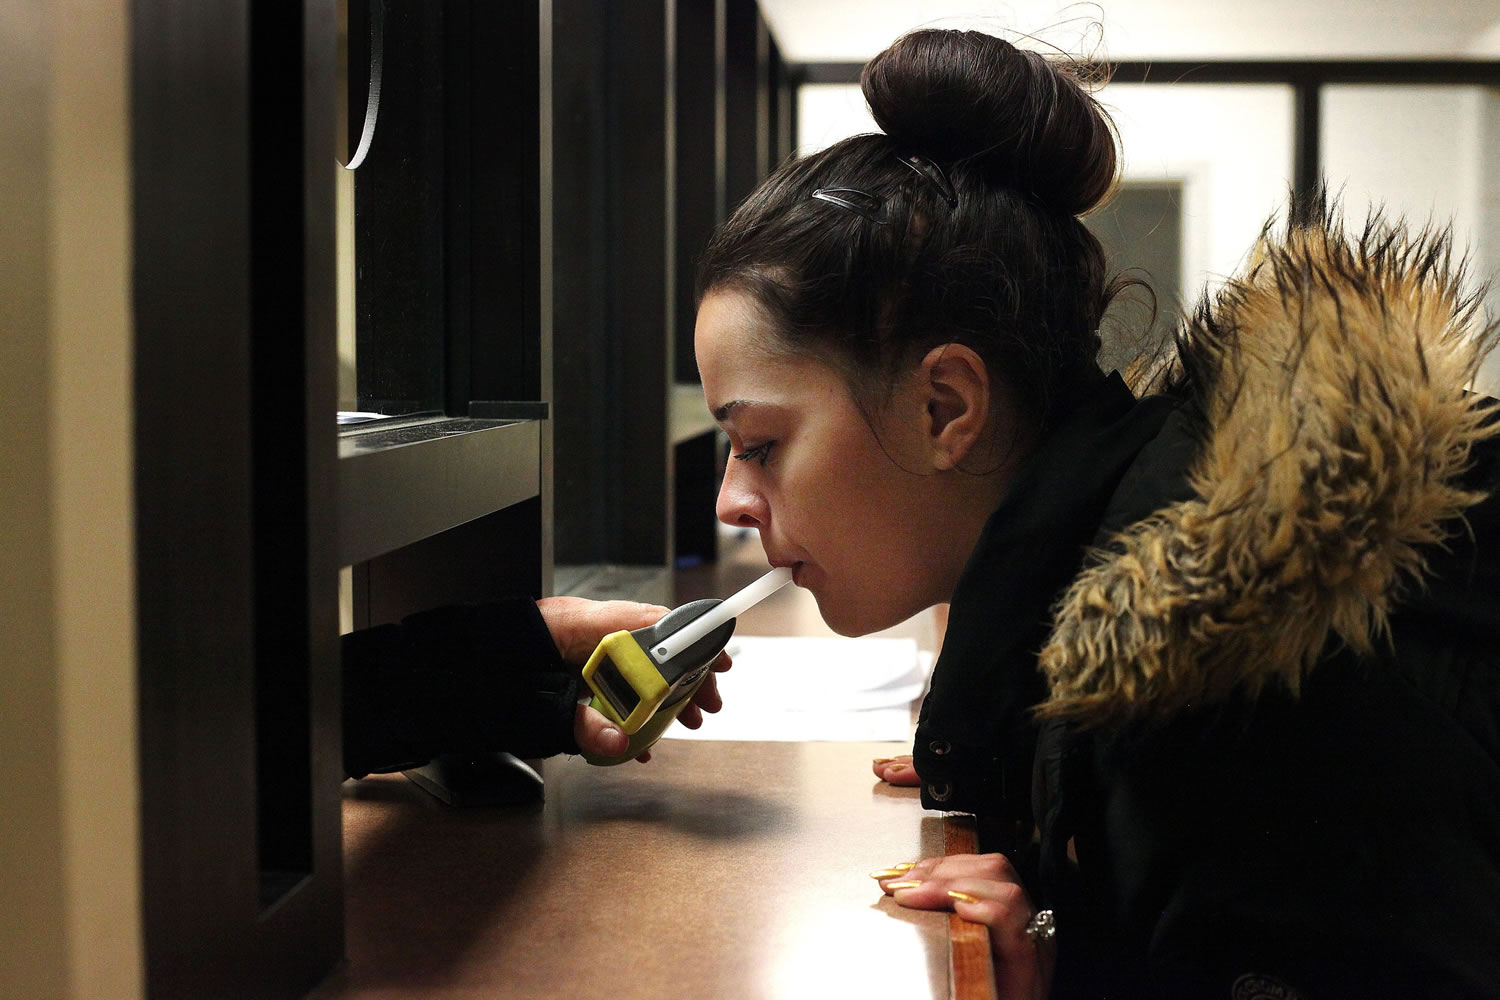 Autumn Regimbal, 19, blows into a Breathalyzer on Sept. 21 in the wing of the county jail dedicated to the state&#039;s 24/7 Sobriety Program in Sioux Falls, S.D.